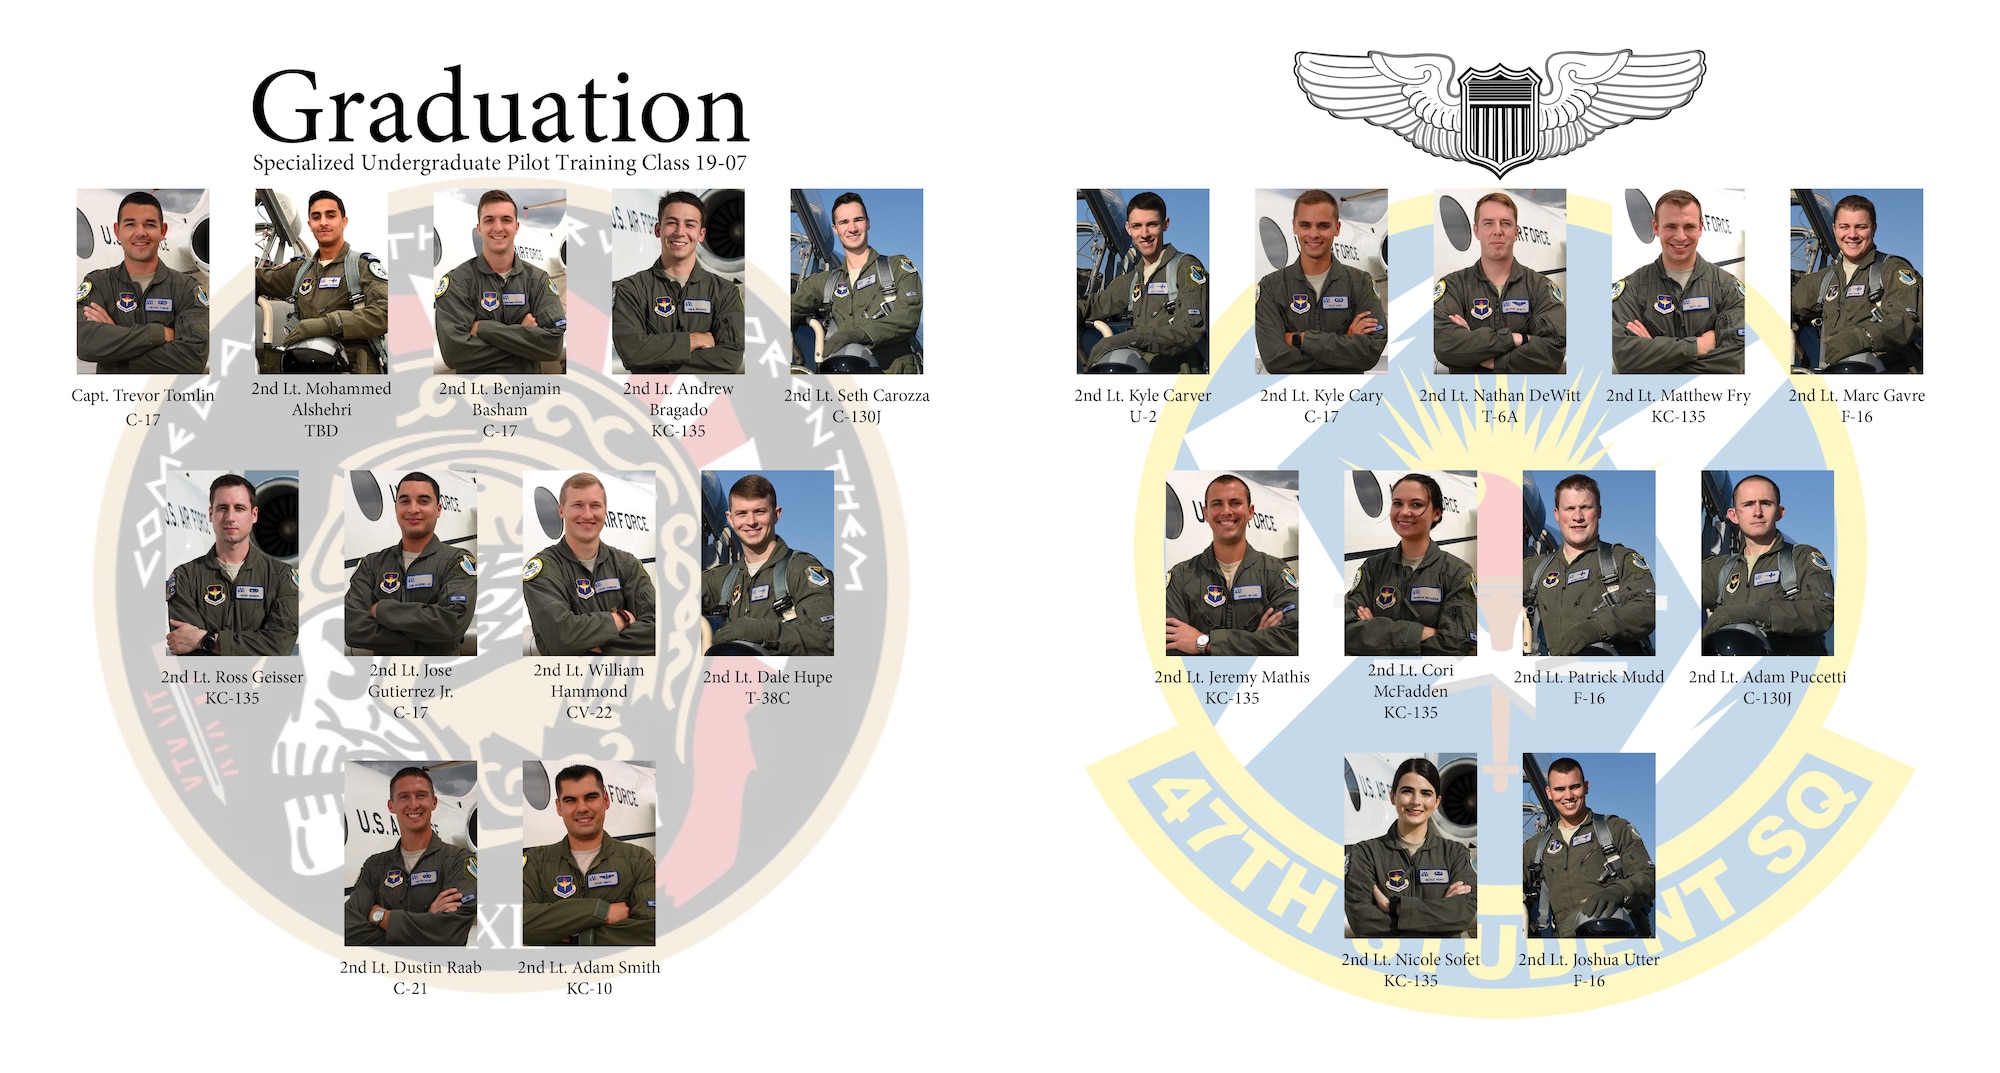 Specialized Undergraduate Pilot Training Class 19-07 graduate after 52 weeks of training at Laughlin Air Force Base, Texas, March 15, 2019. Laughlin is the home of the 47th Flying Training Wing, whose mission is to train the next generation of multi-domain combat aviators, deploy mission-ready warriors and develop professional, confident leaders. (U.S. Air Force graphic by Airman 1st Class Marco A. Gomez)